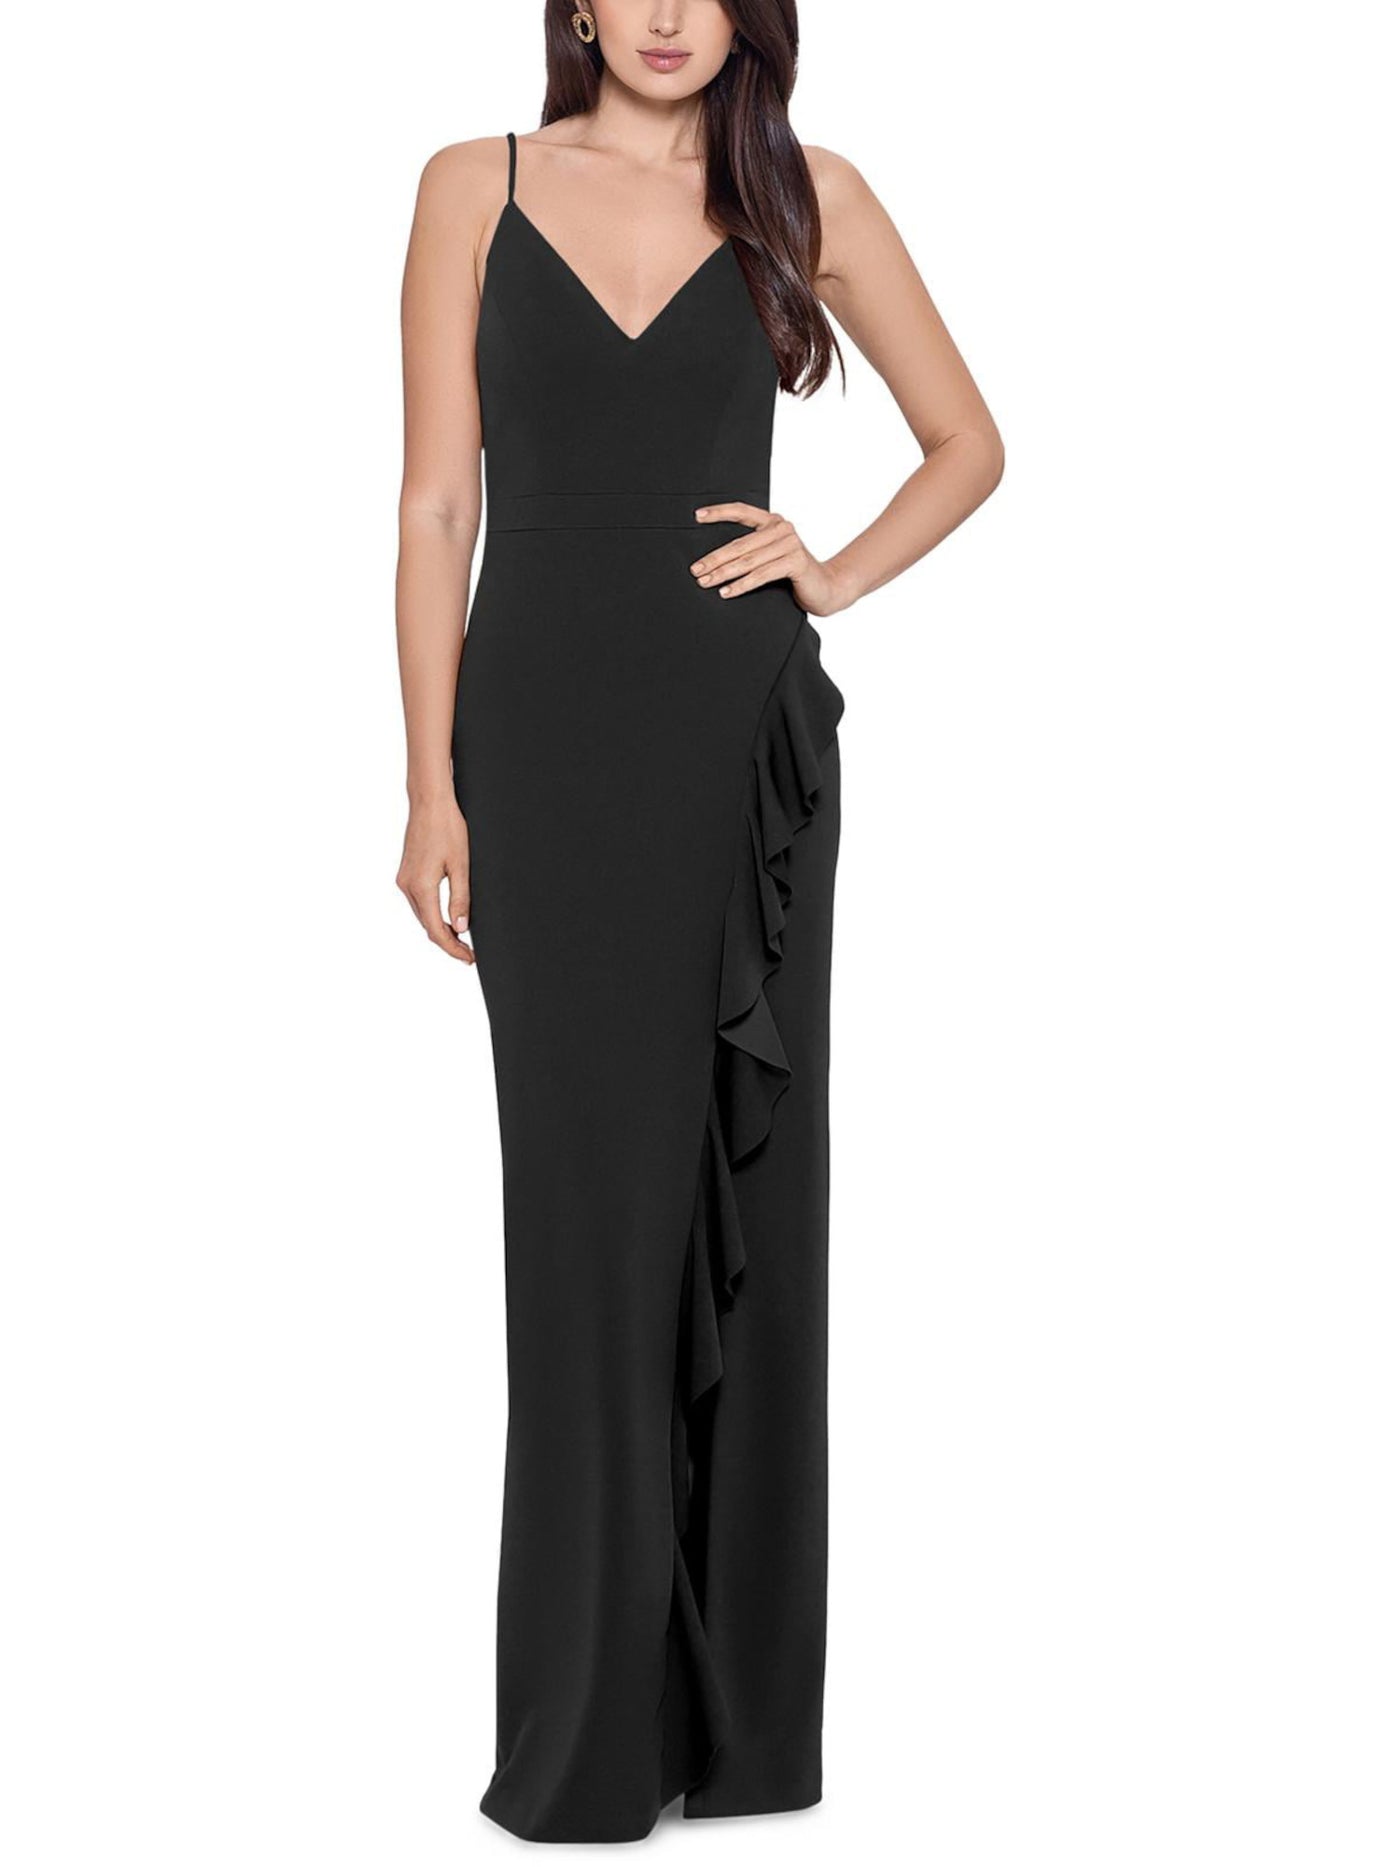 XSCAPE Womens Black Stretch Slitted Zippered Cascade Ruffle Lined Spaghetti Strap V Neck Full-Length Formal Gown Dress 2